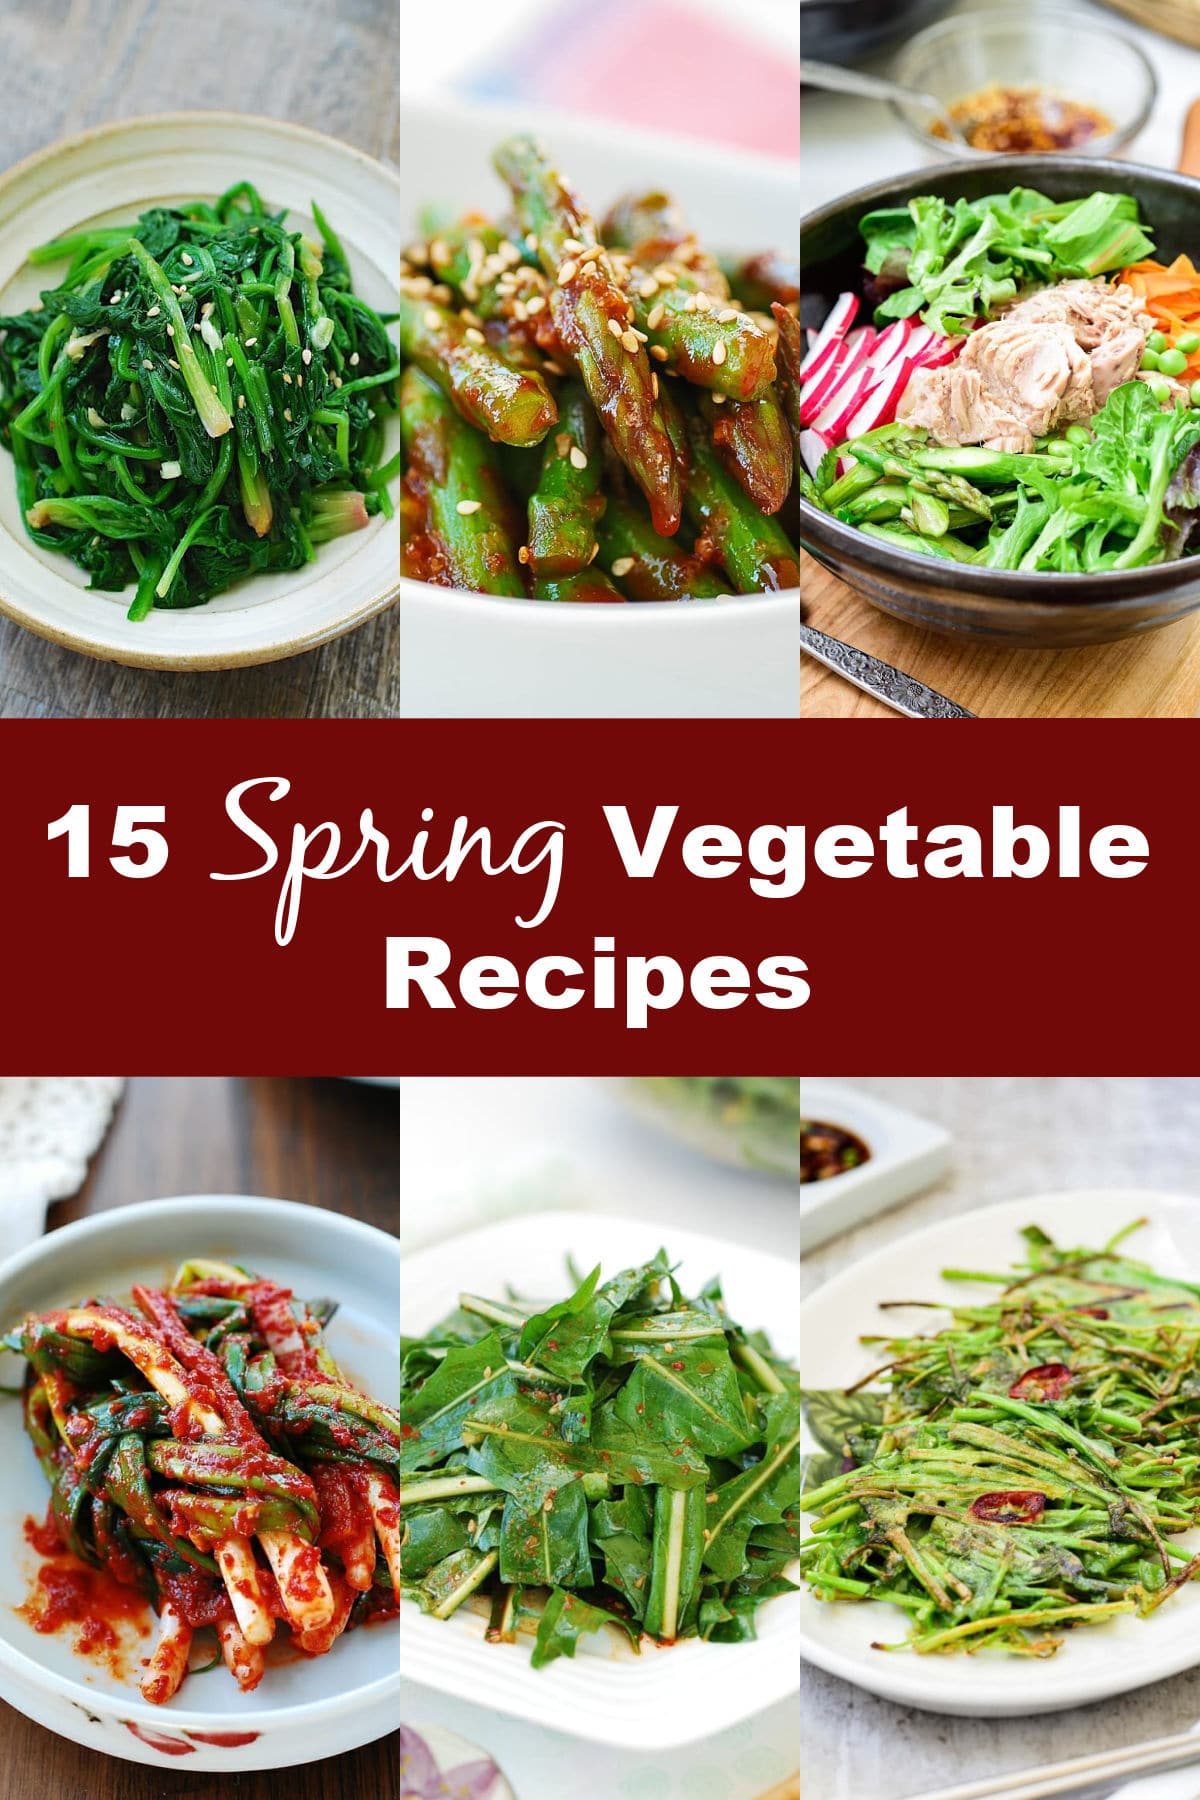 4 x 6 in copy 3 3 - 15 Spring Vegetable Recipes